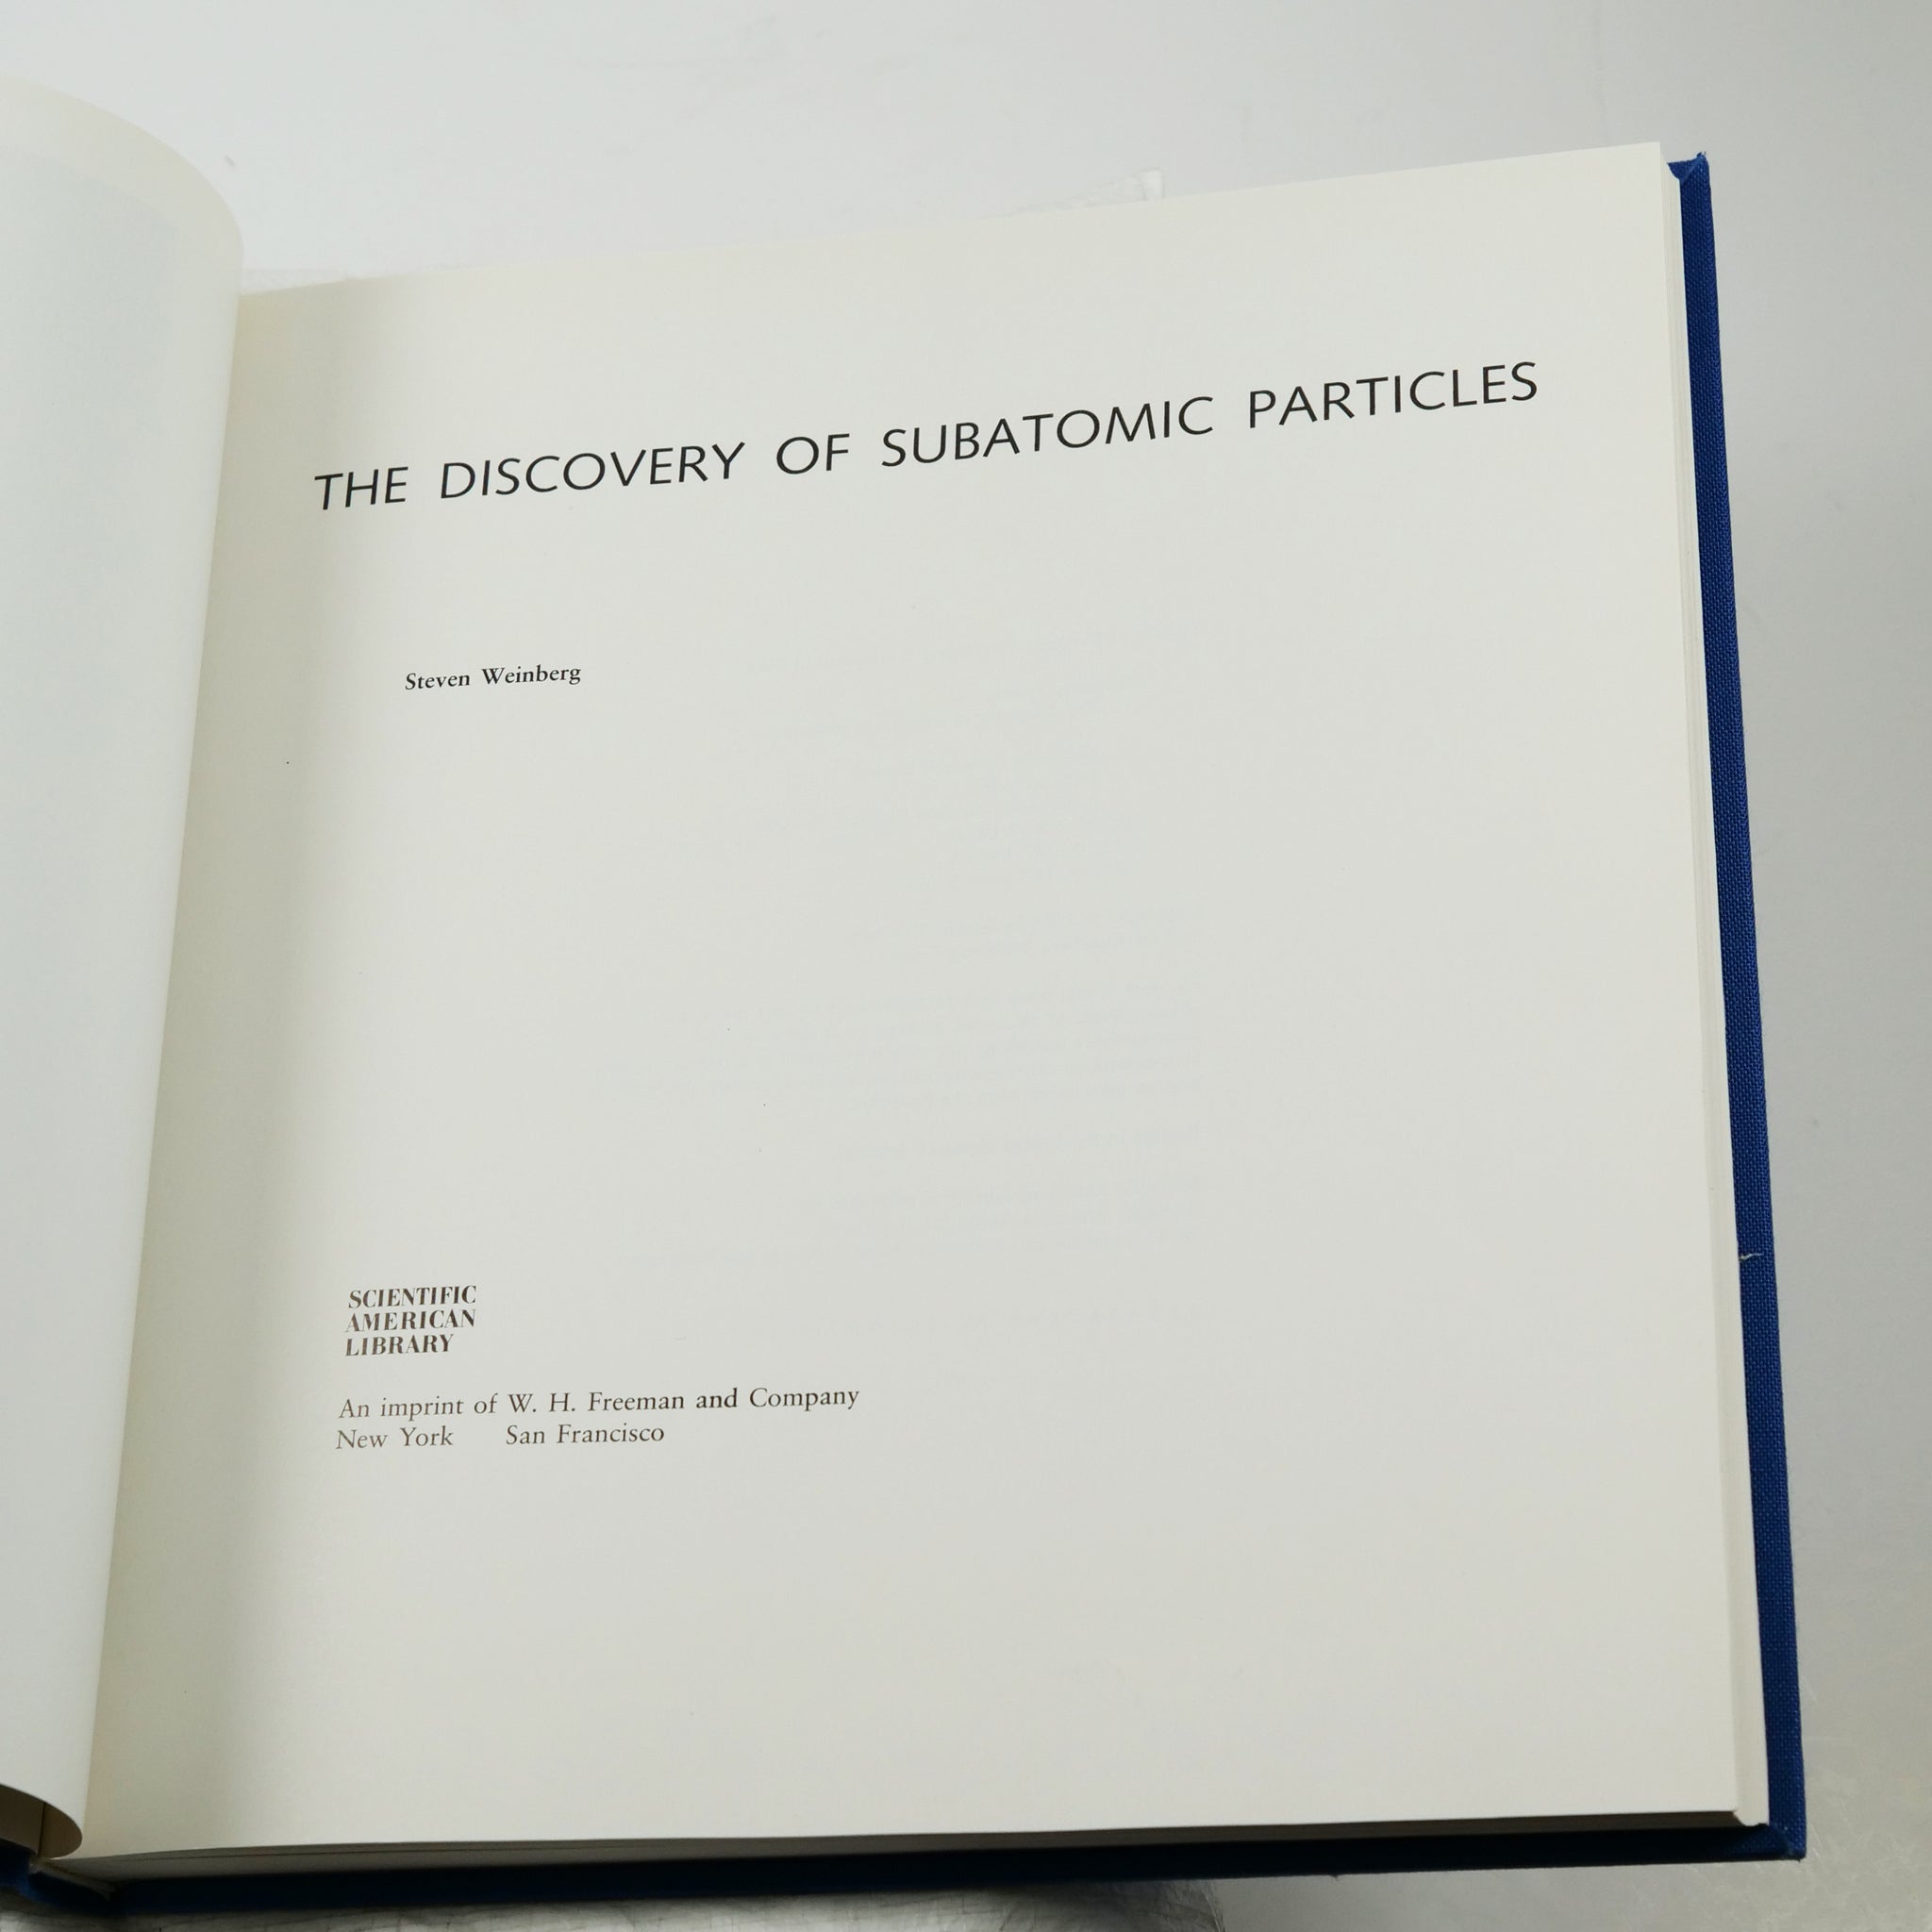 Weinberg, Steven | The Discovery of Subatomic Particles - Alembic Rare ...